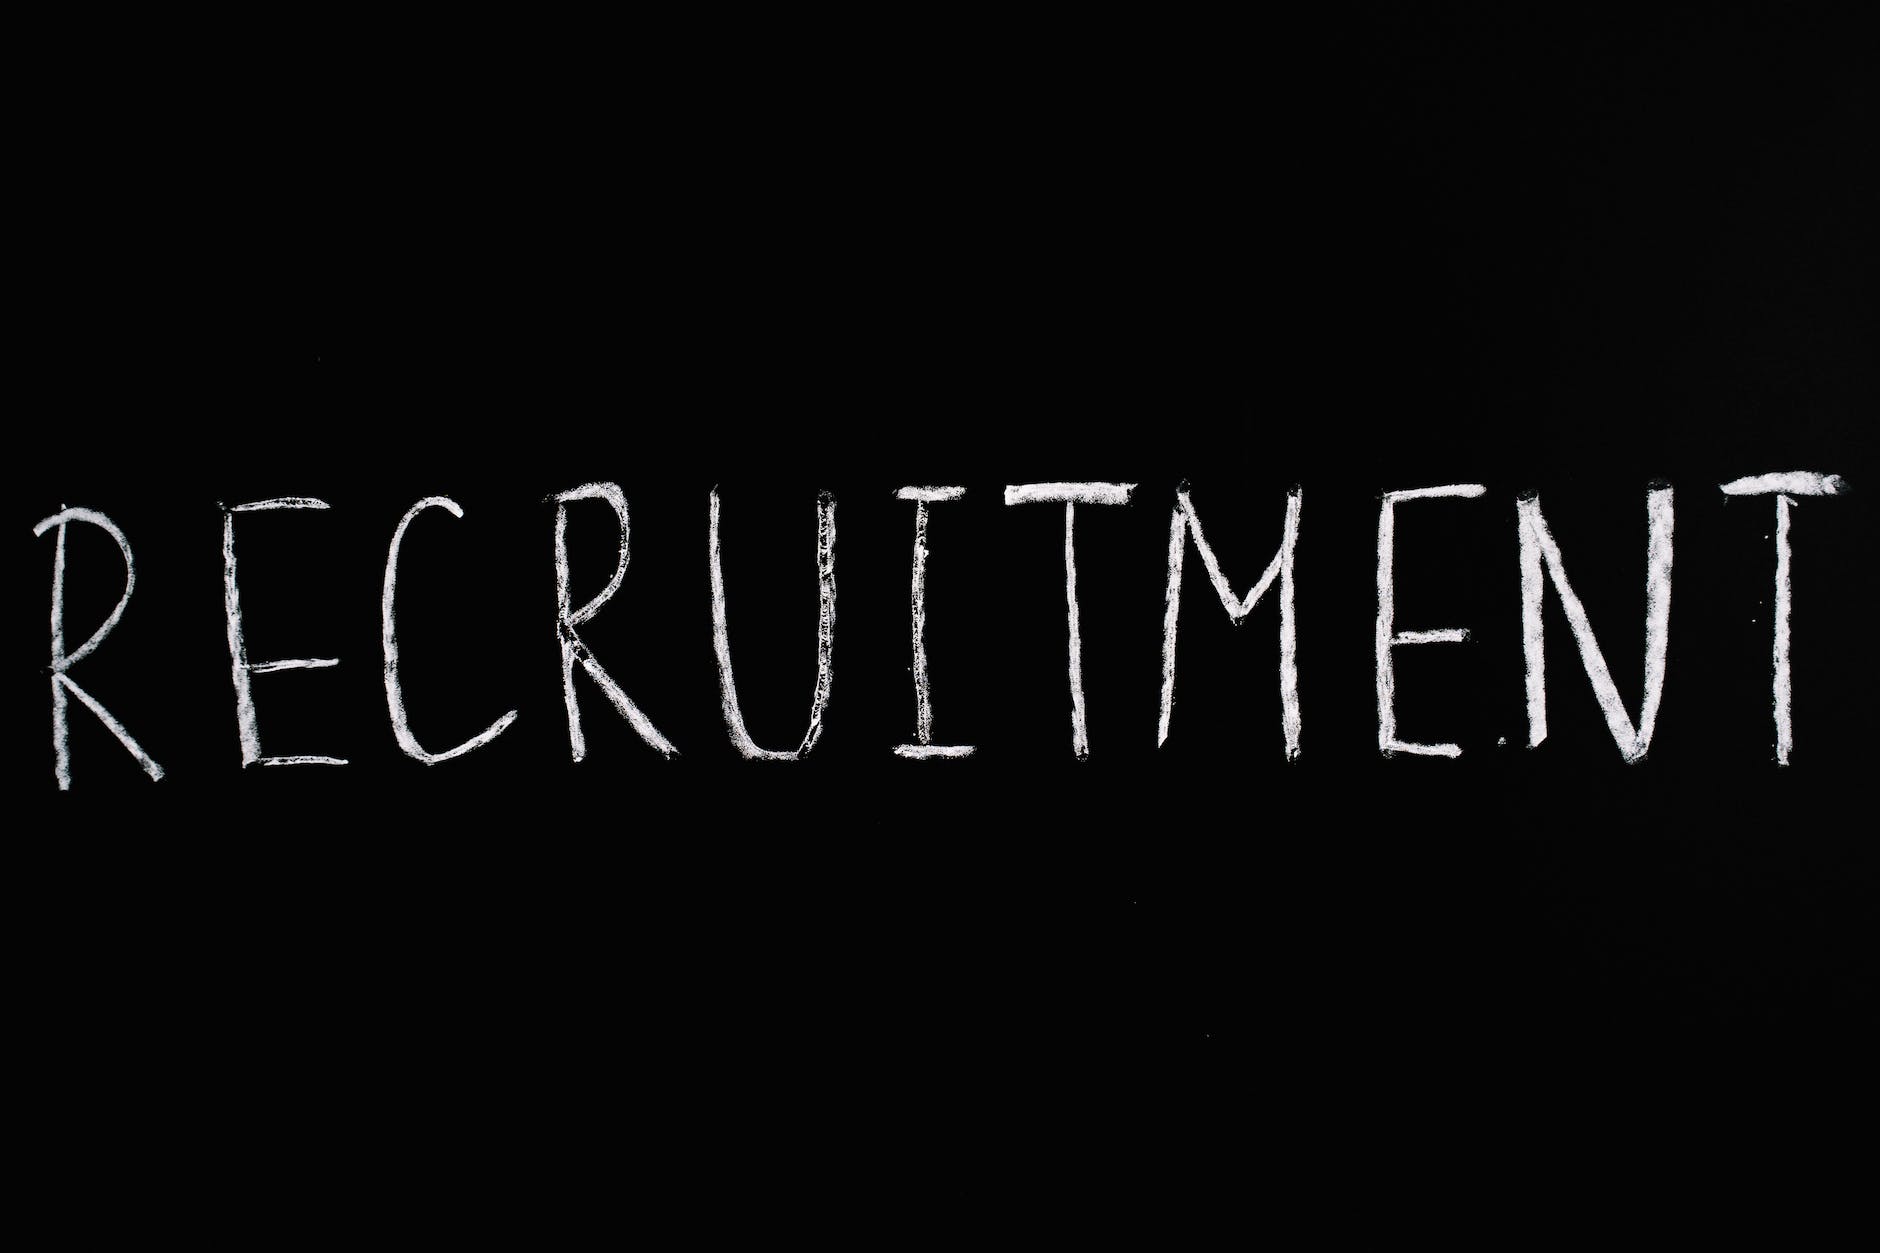 recruitment lettering text on black background